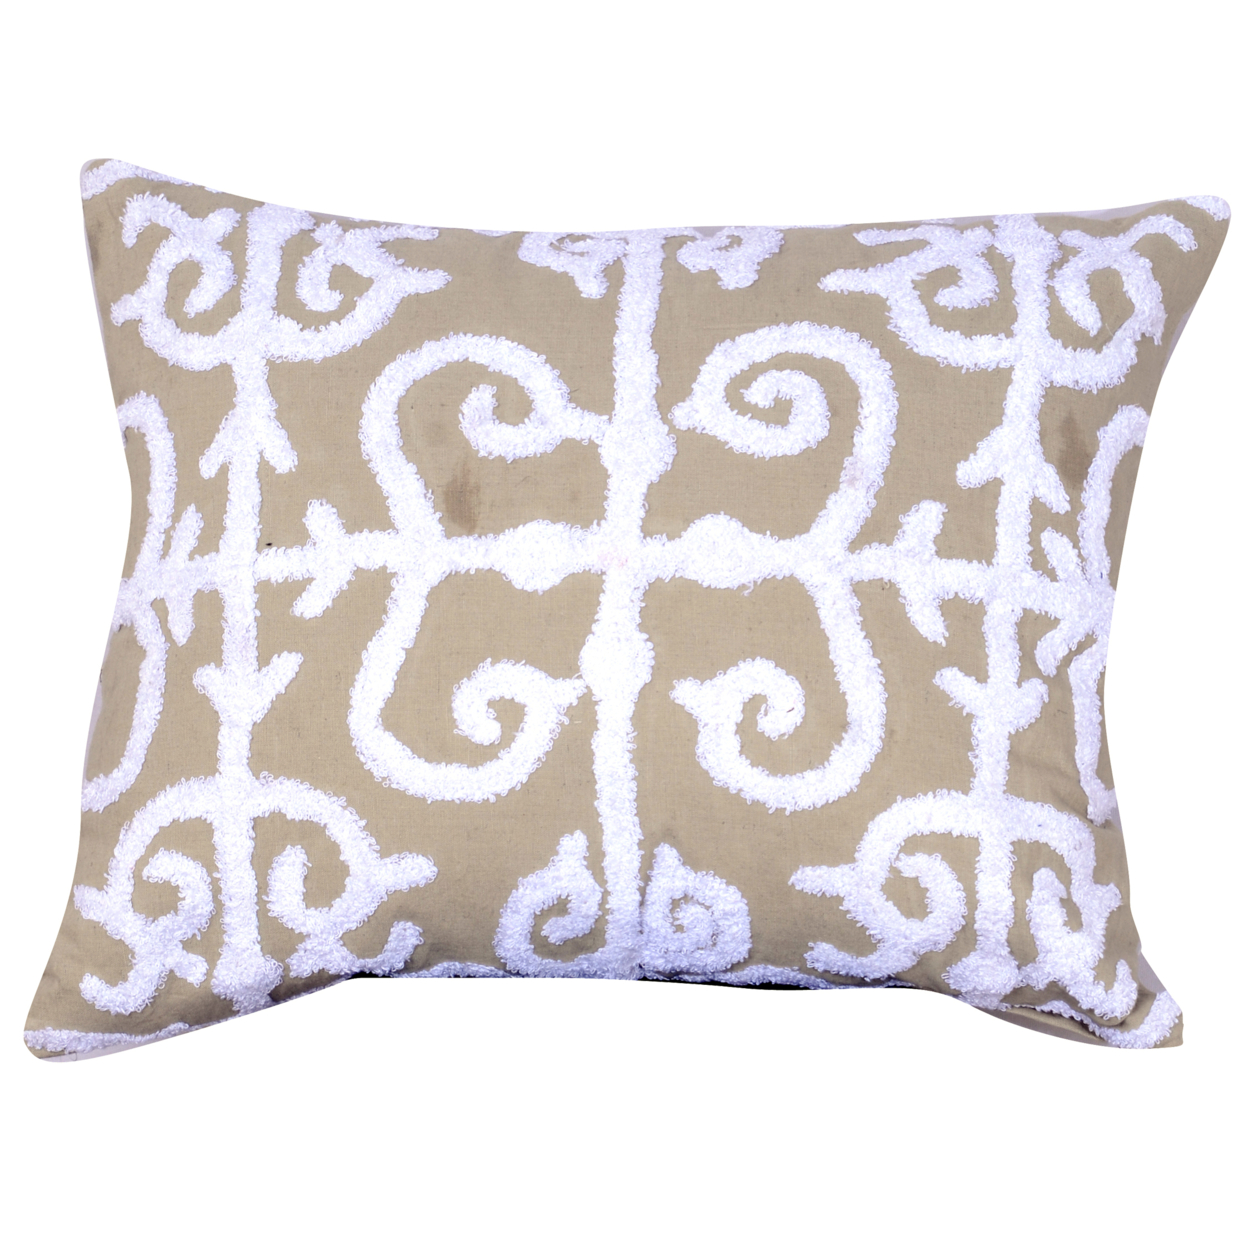 20 X 16 Inch Cotton Pillow With Vermicular Pattern, Set Of 2, Brown And White- Saltoro Sherpi